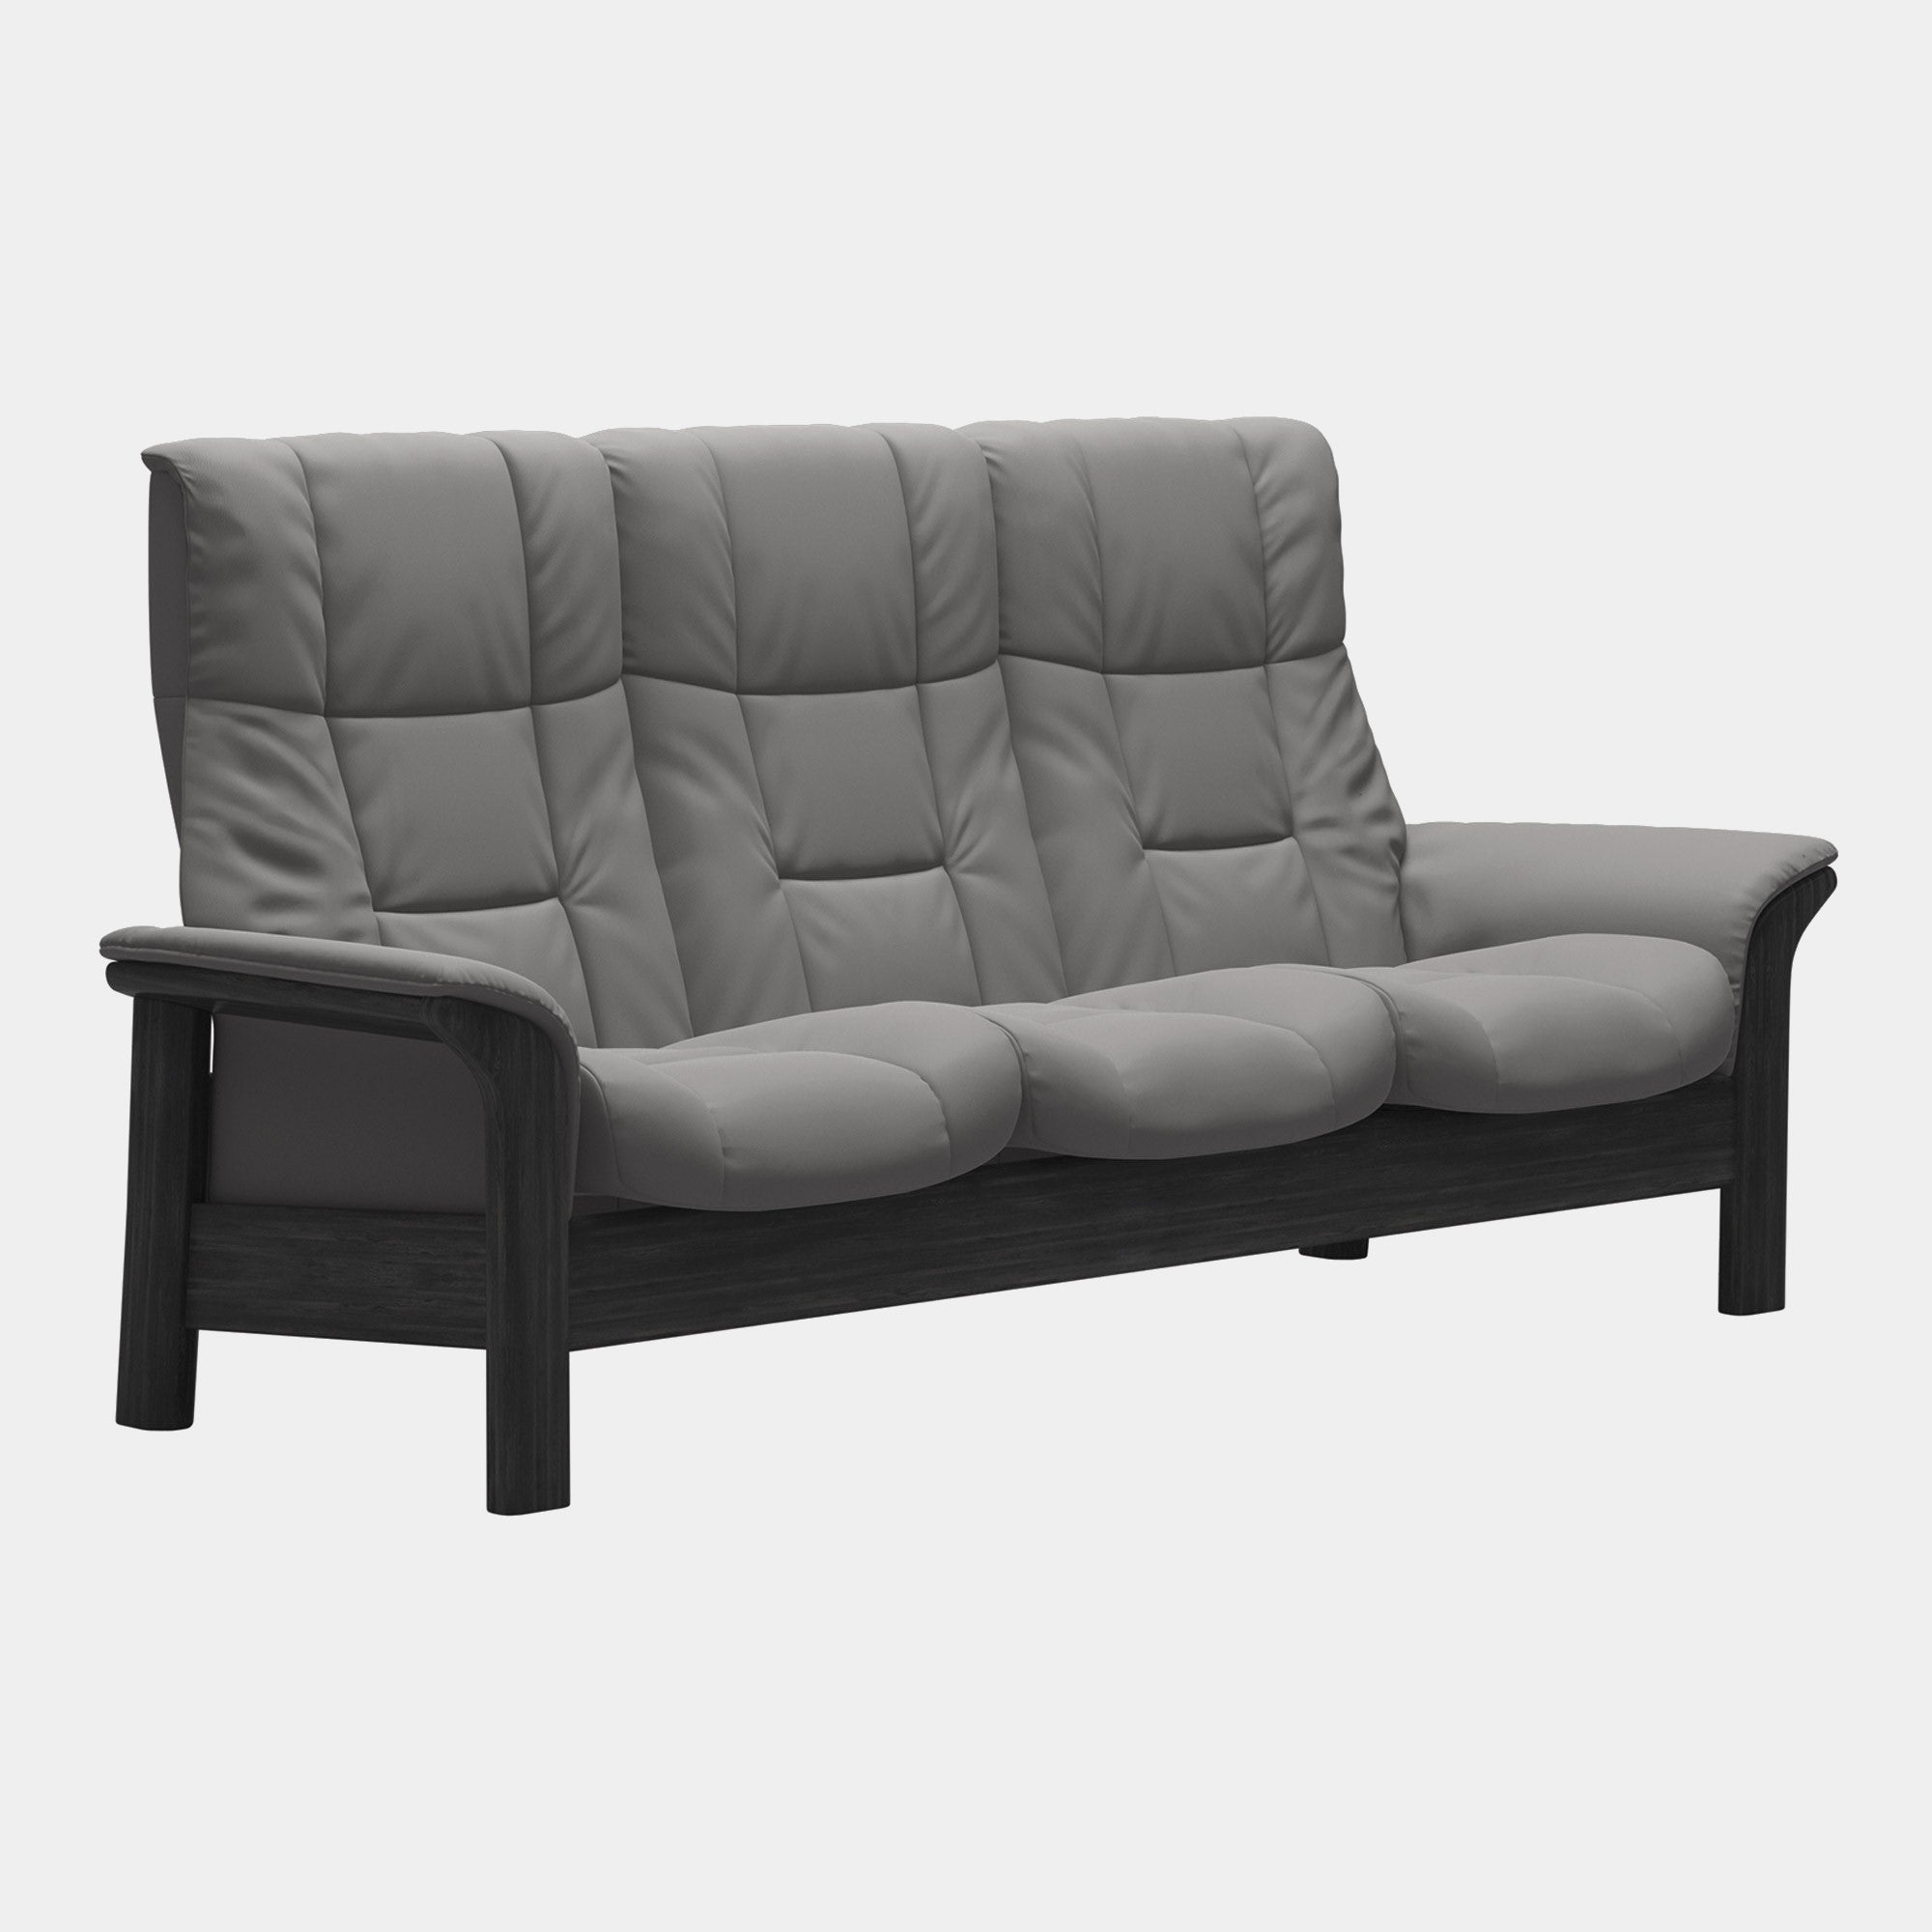 Stressless Windsor - 3 Seat Sofa High Back In Paloma Leather Silver With Grey Wood Base